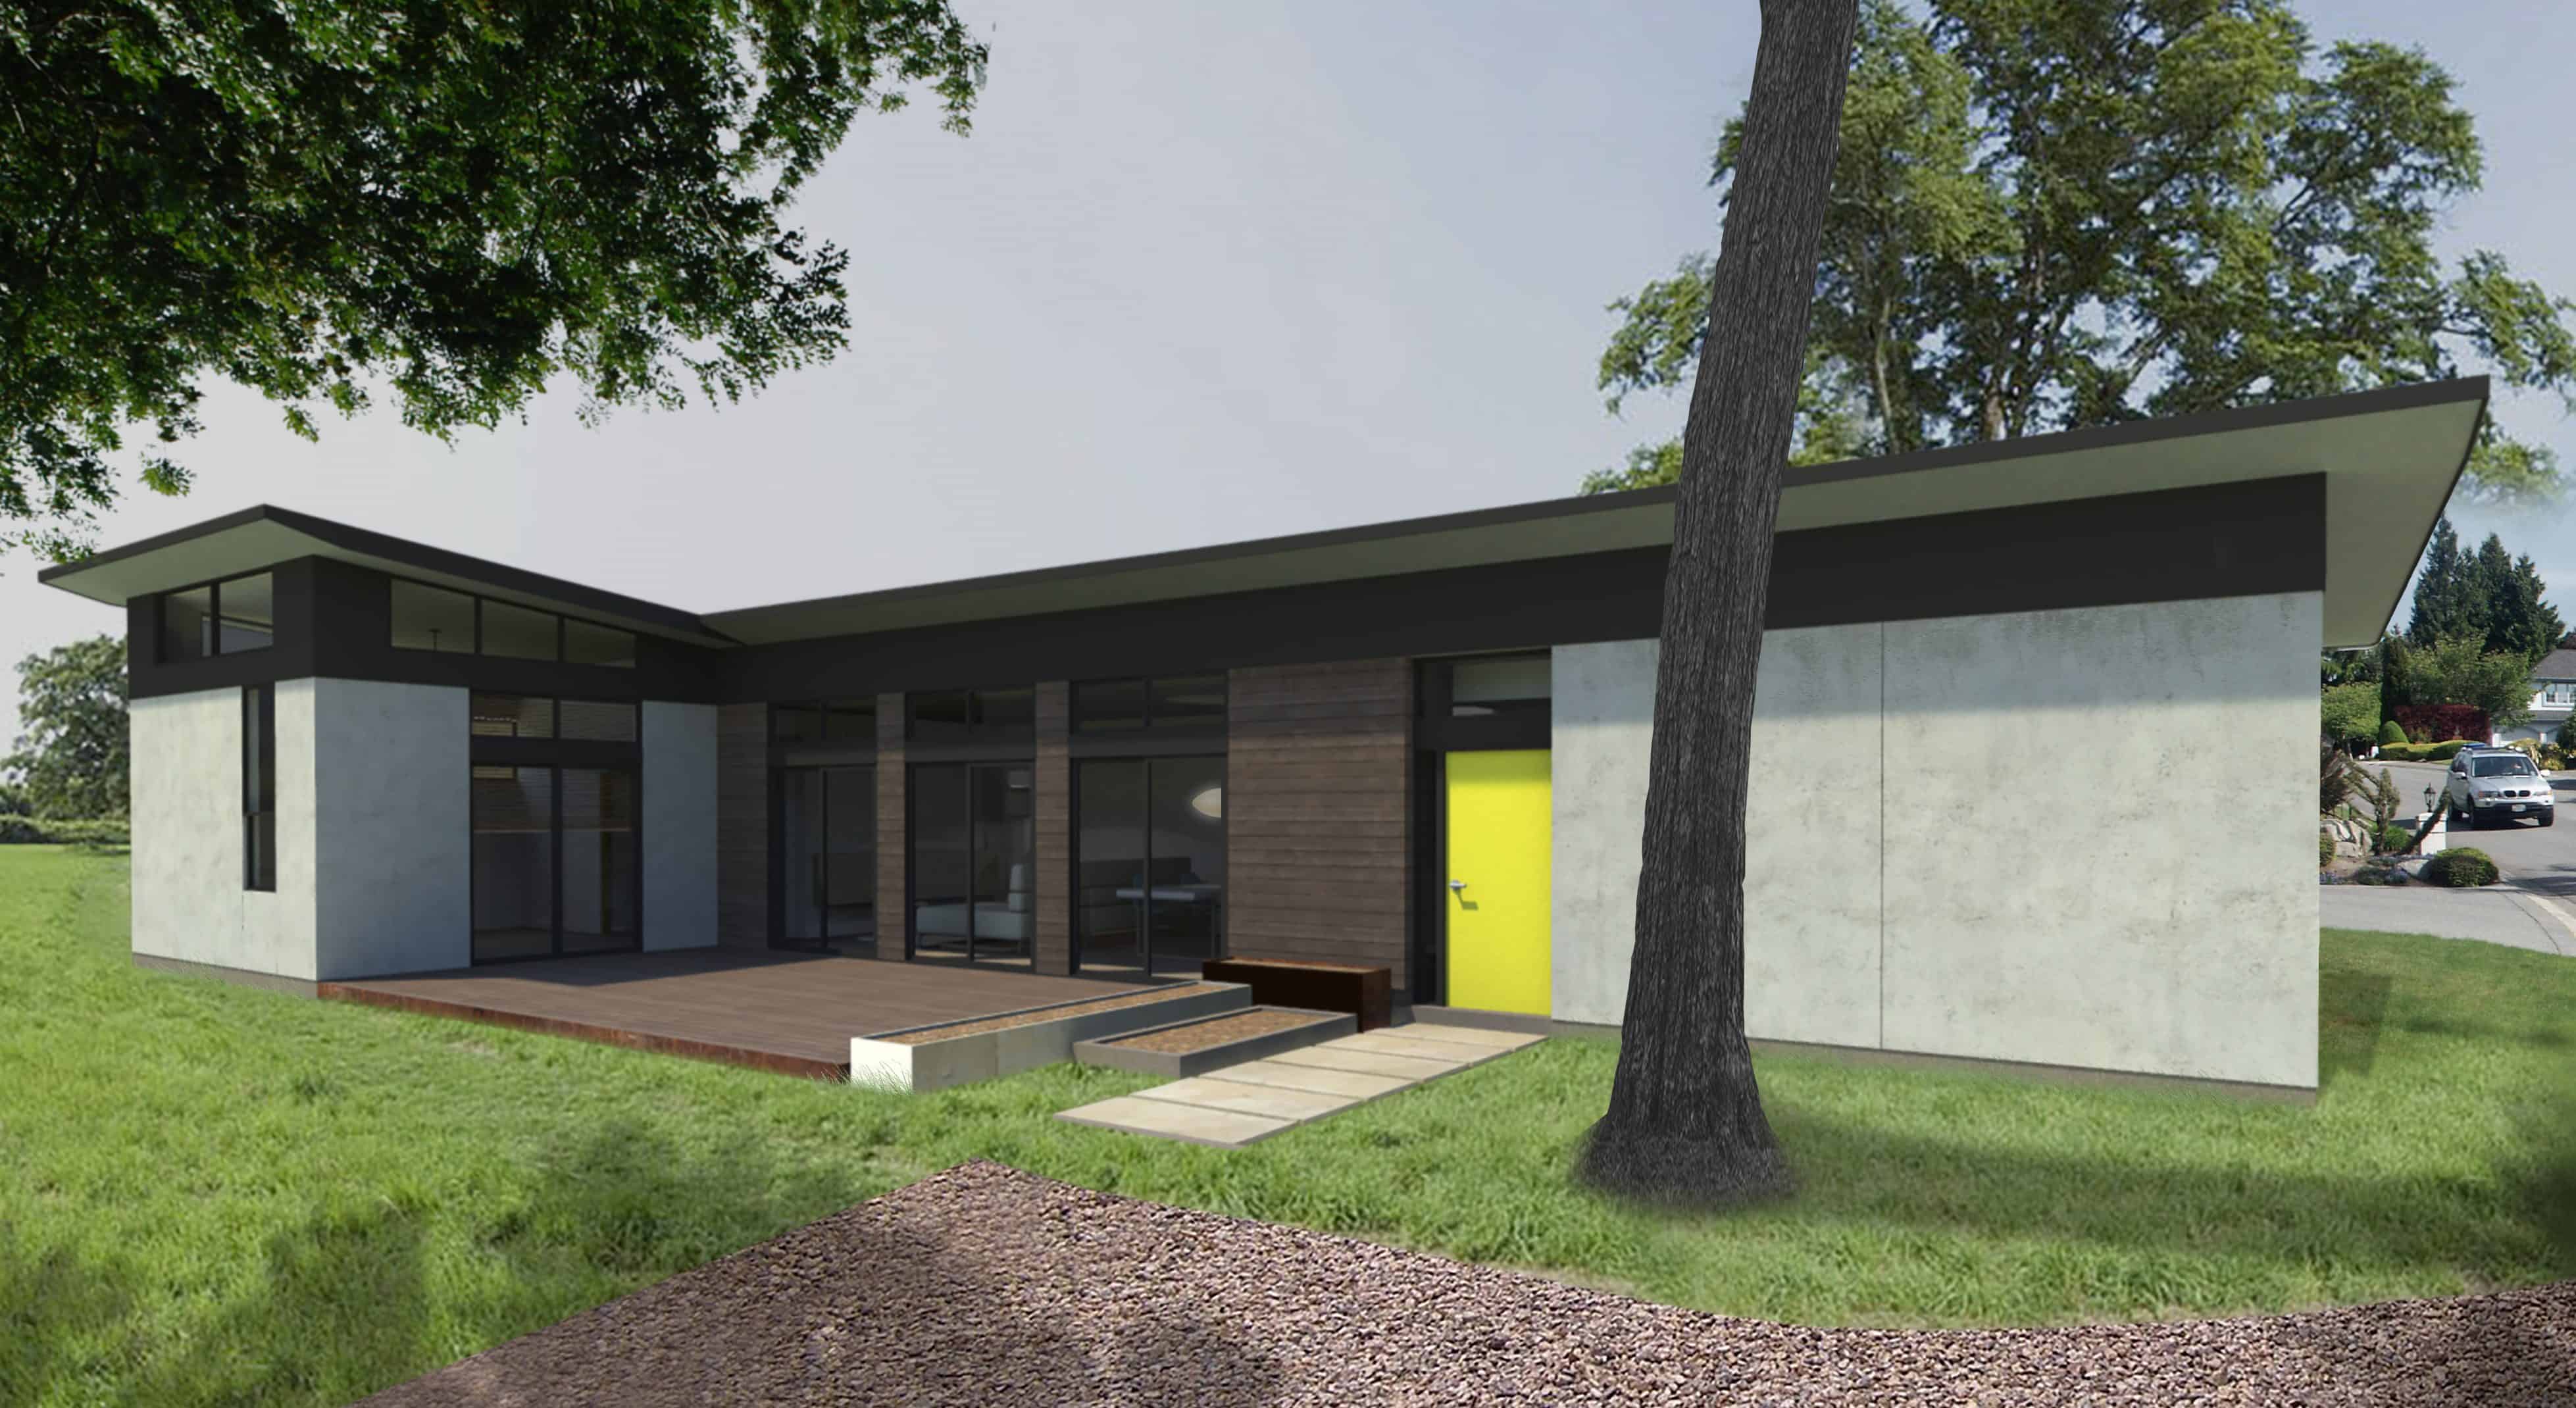 MA Modular L Plan modern prefab home model rendering with view from front.